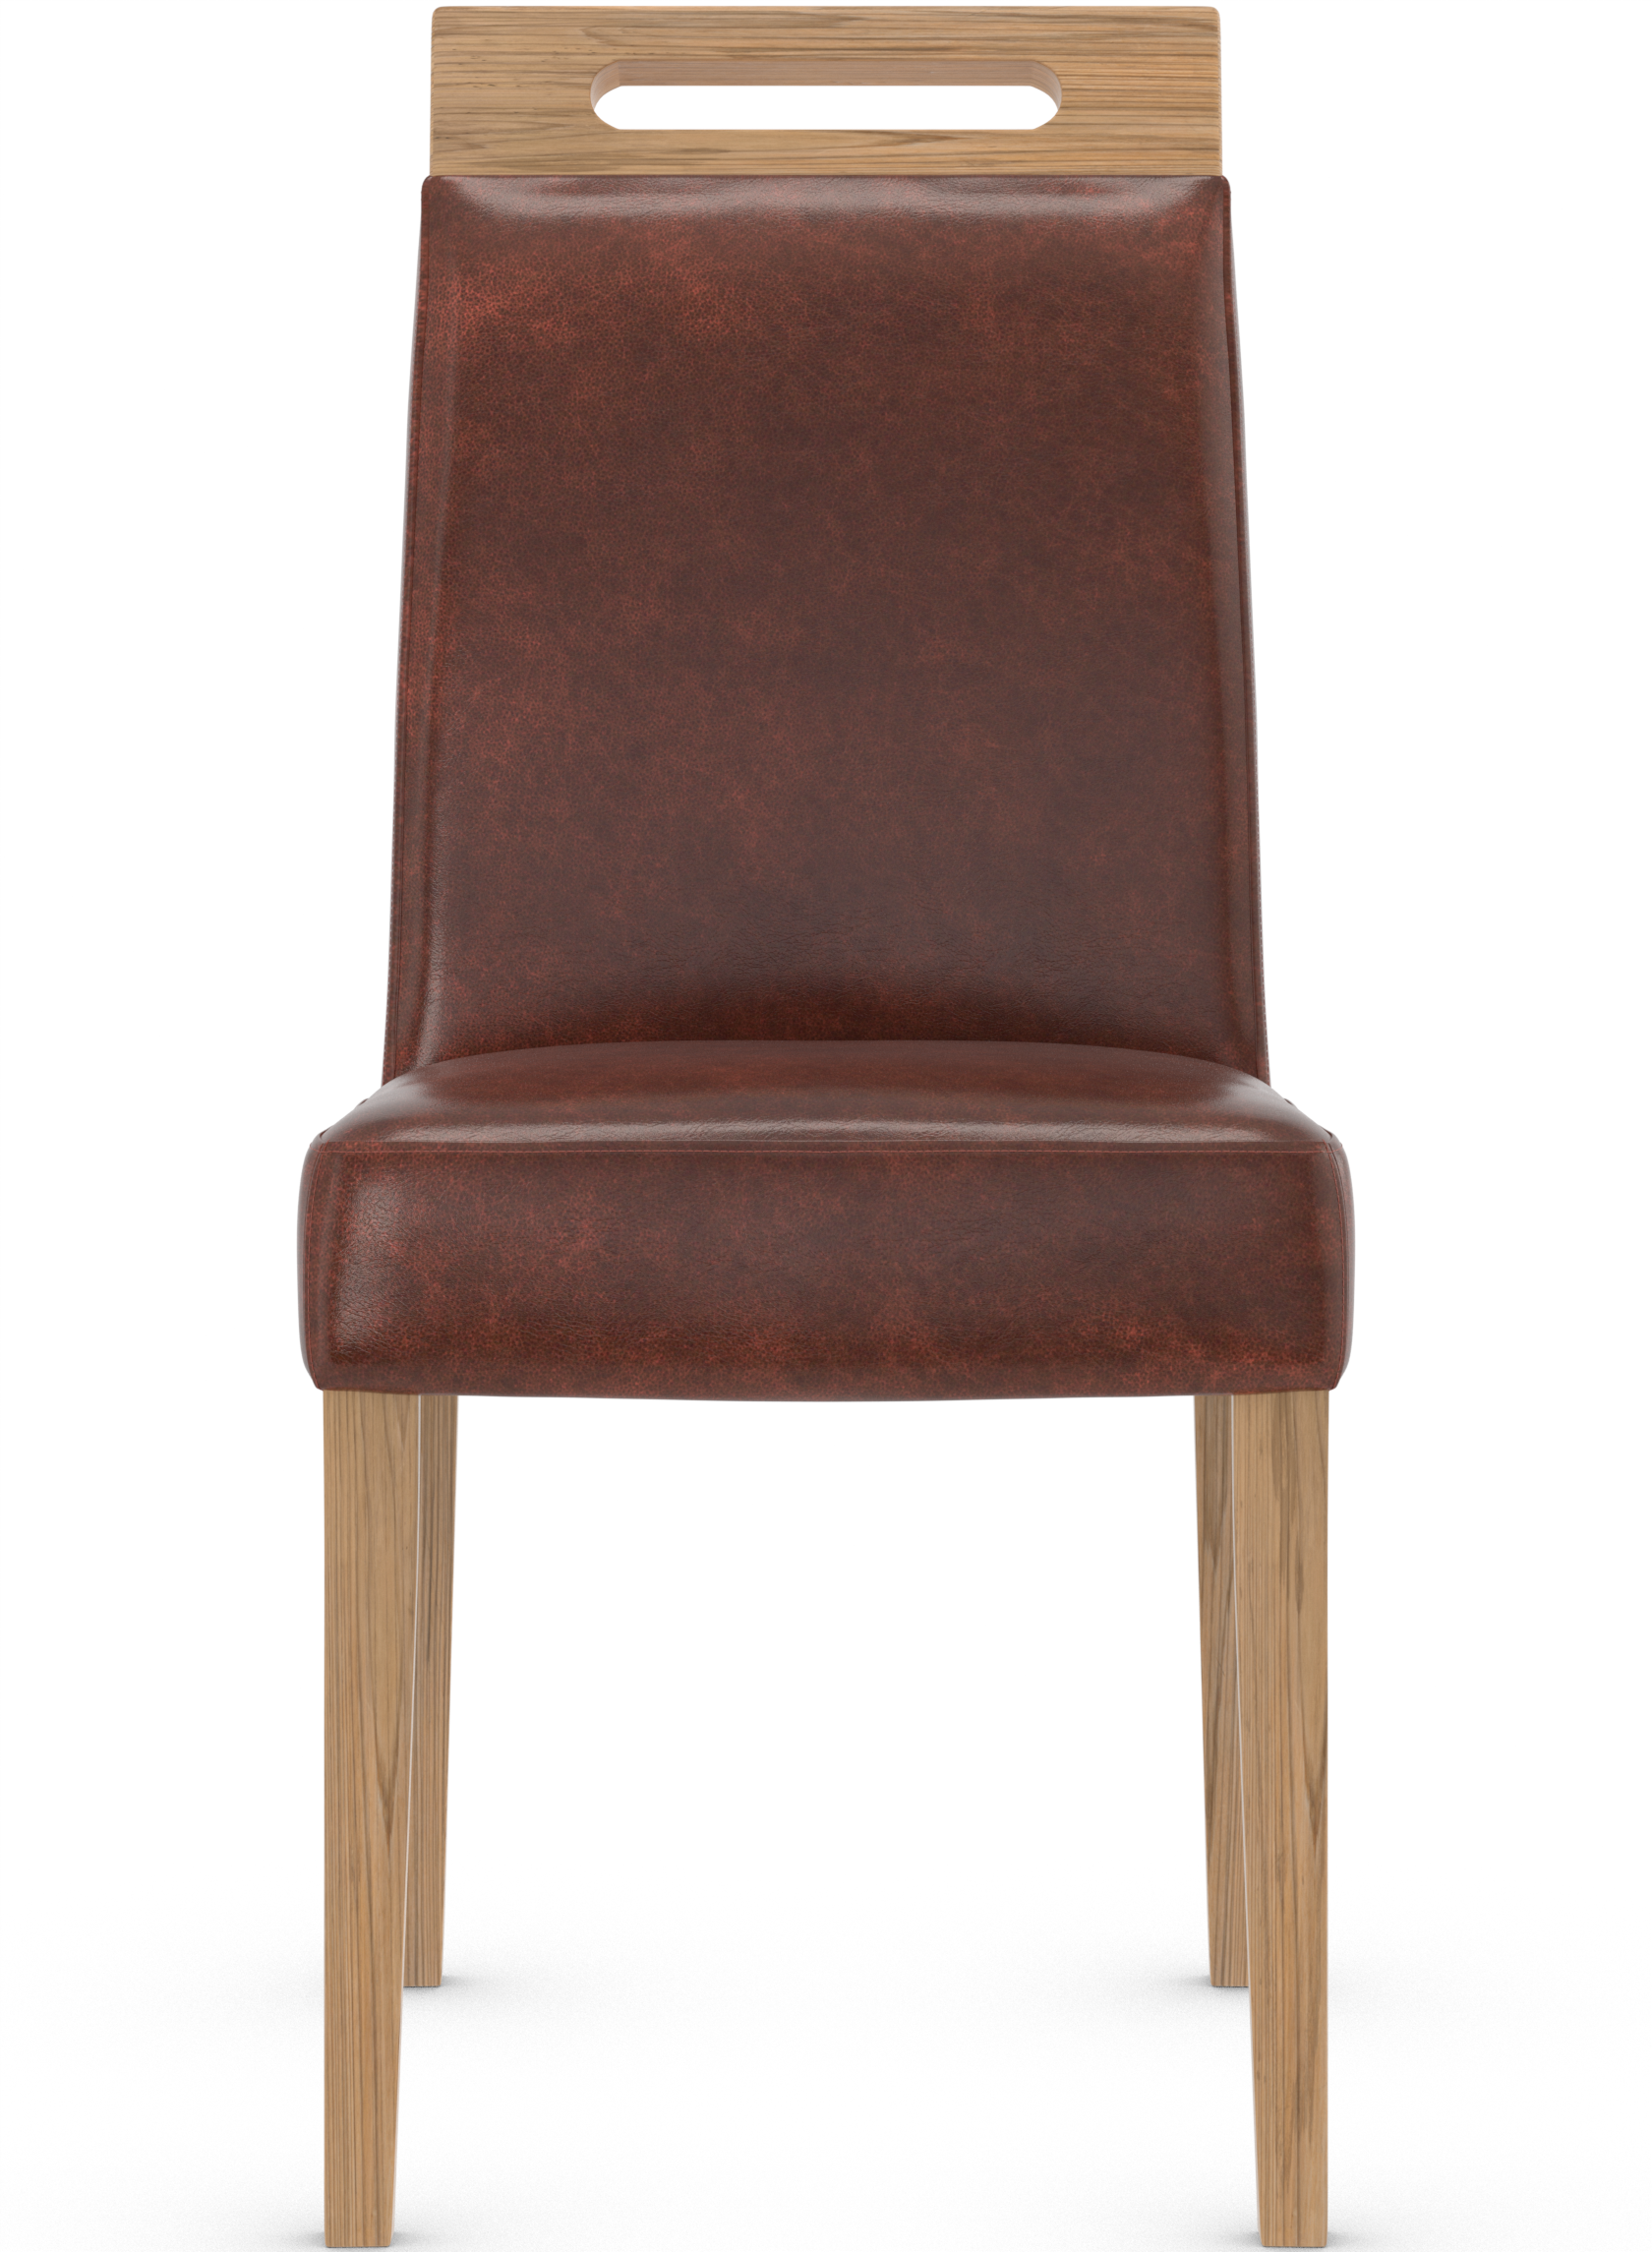 Modena Light Oak Dining Chair Bonded Leather